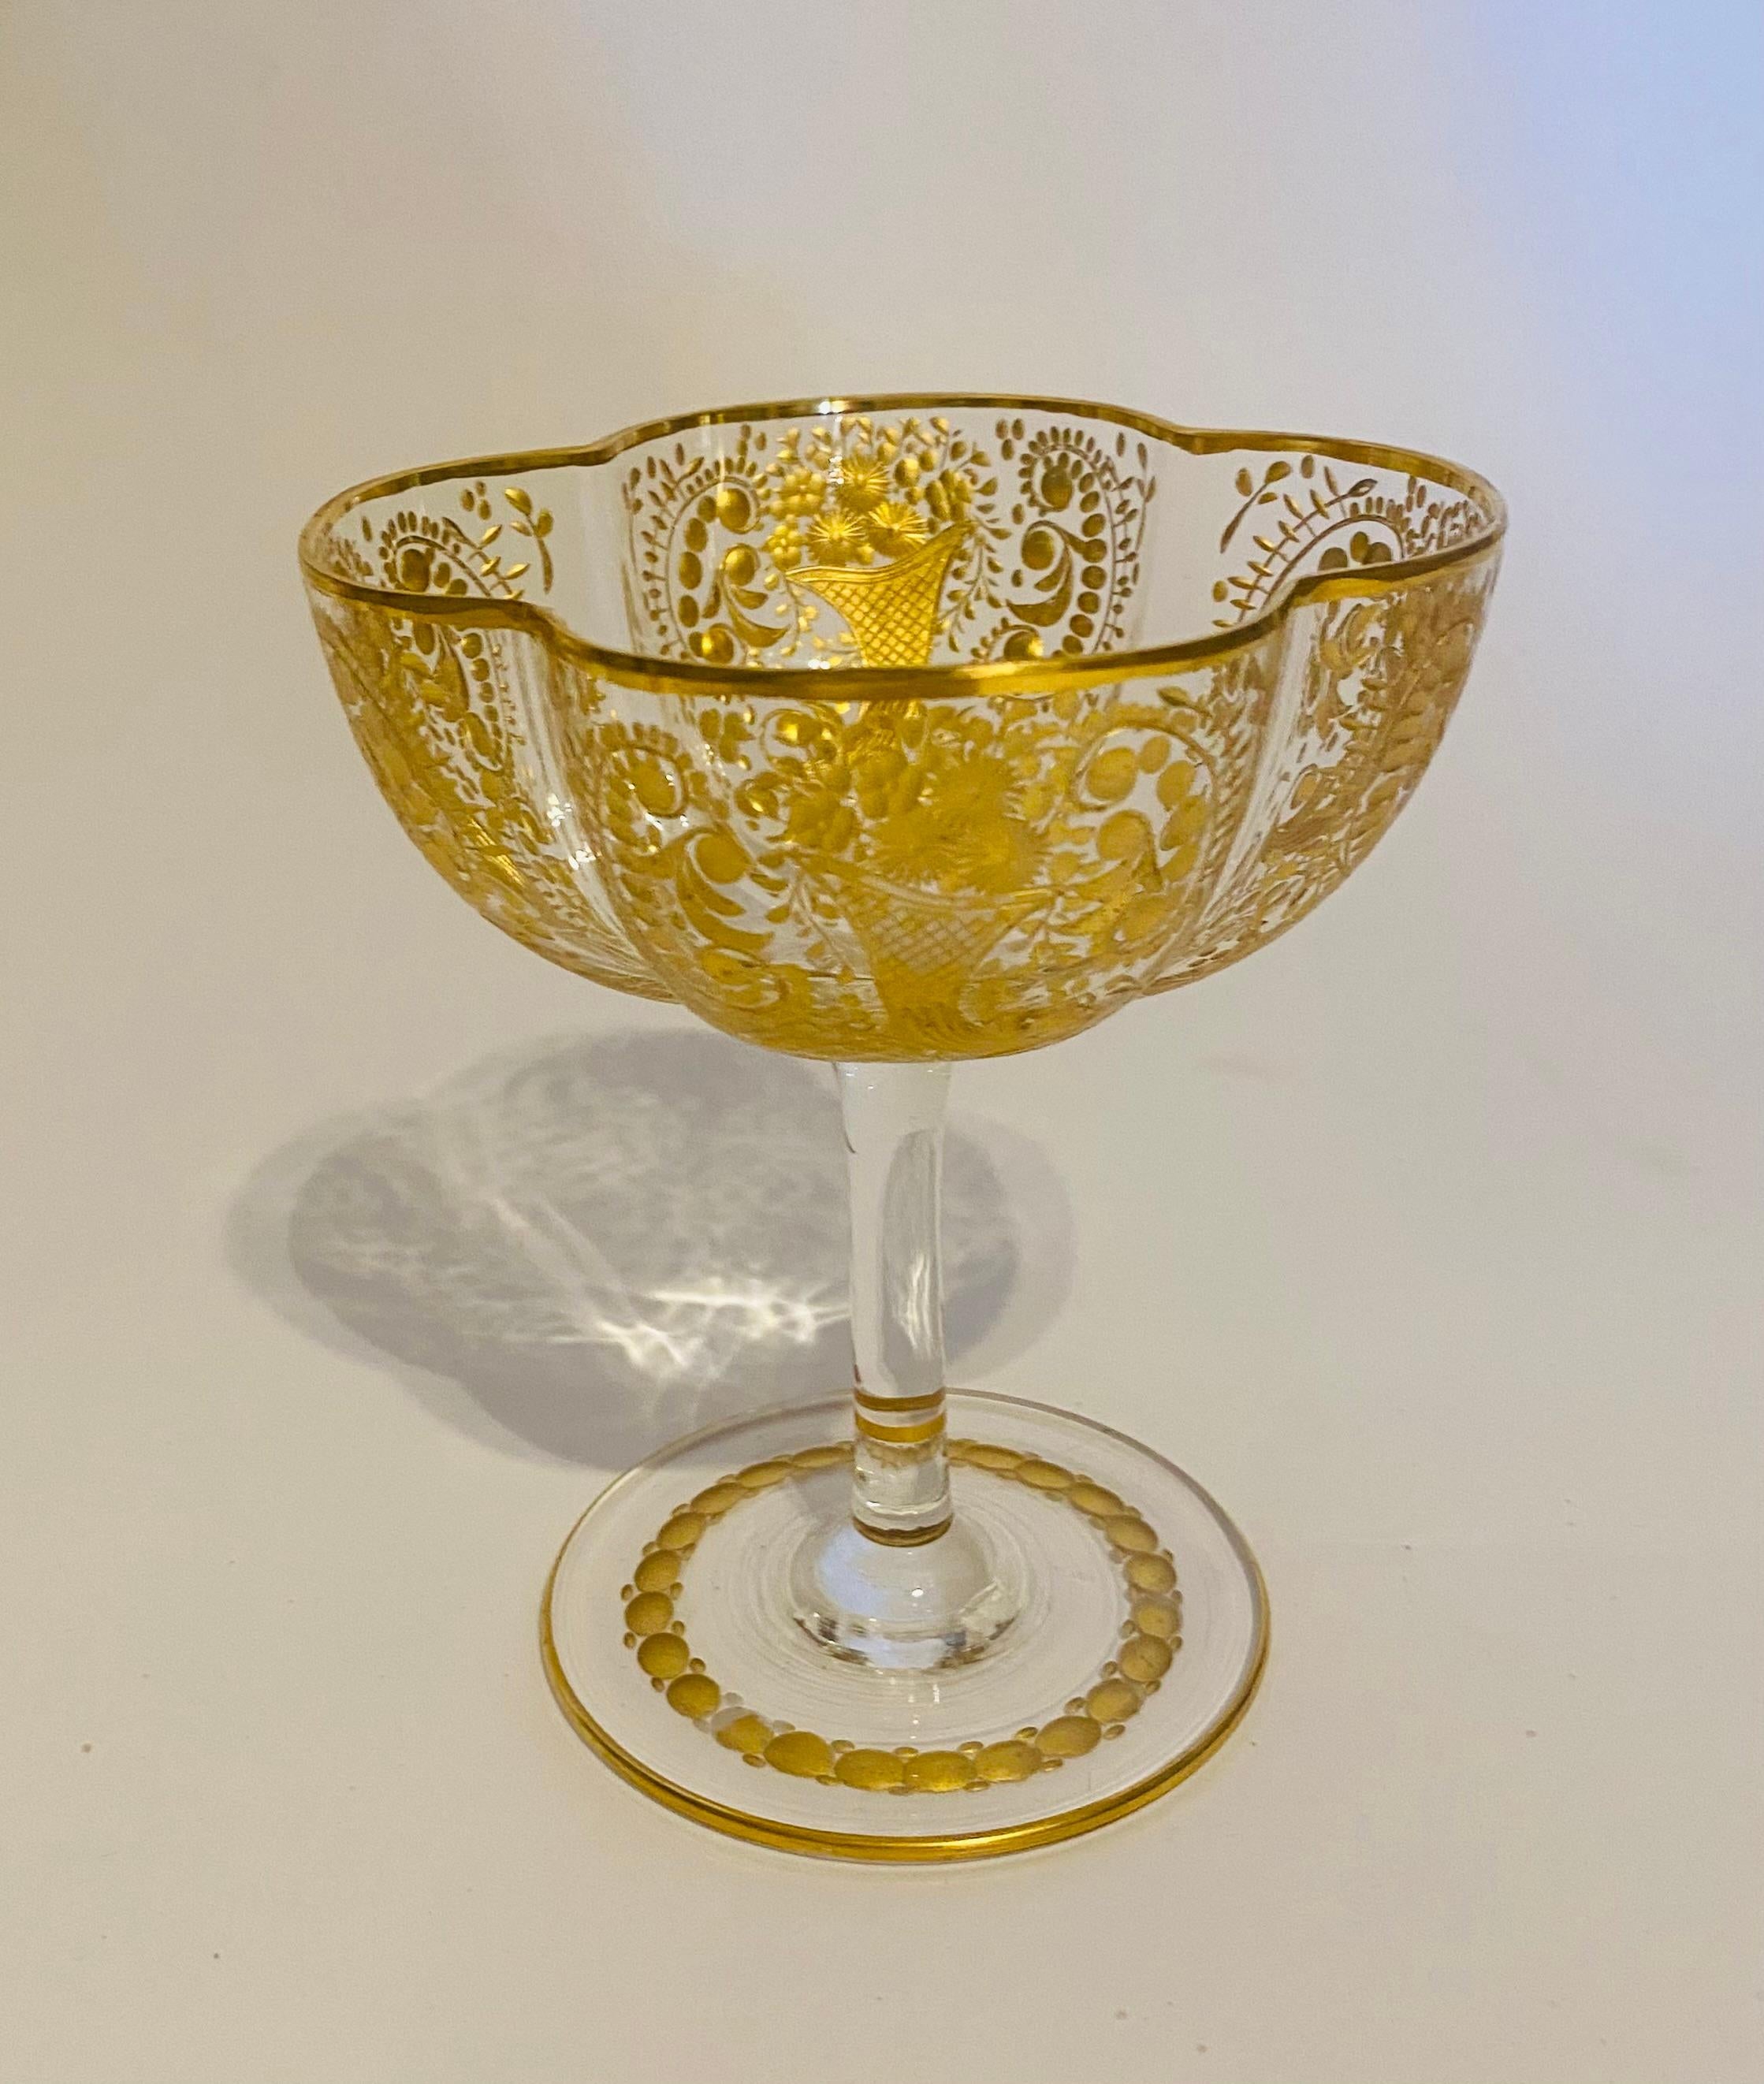 Extensive 55 Piece Antique Moser Crystal Service, Intaglio Cut & 24 Karat Gold In Good Condition For Sale In West Palm Beach, FL